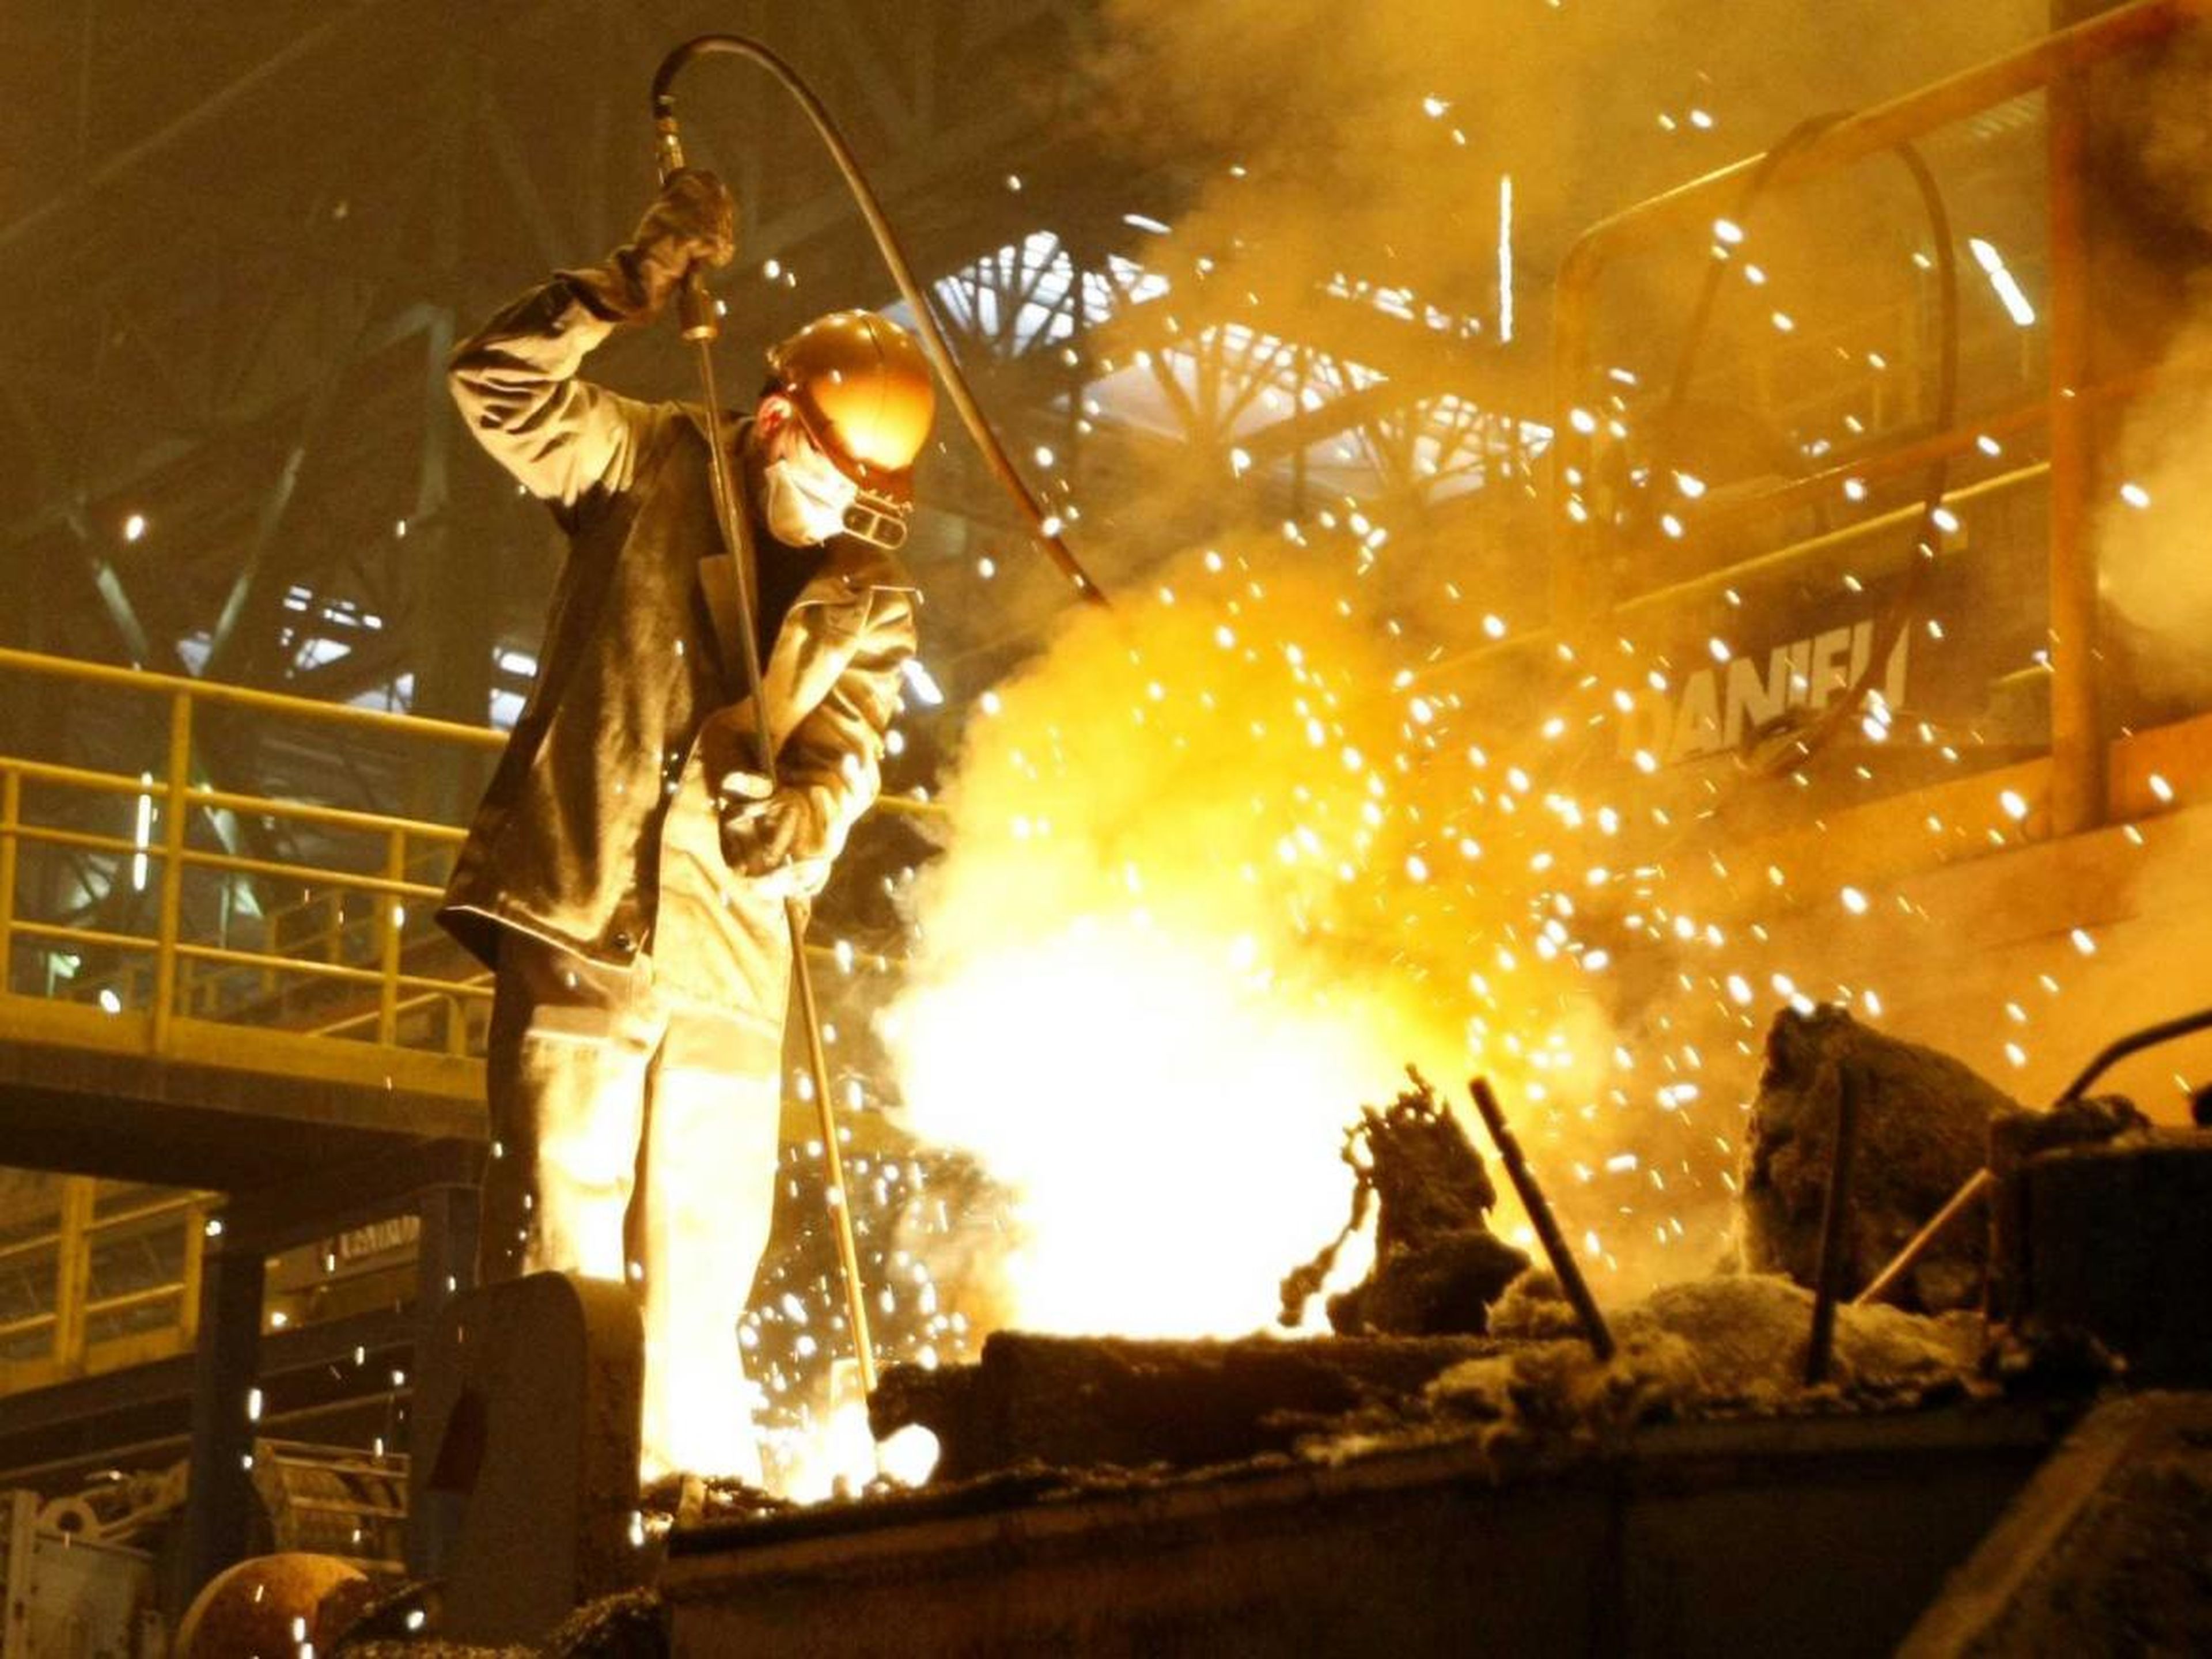 10. Iron and steel mills and steel product manufacturing had an 11% decline in employment between 2013 and 2018. 88.2% of workers in the industry in 2018 were men.